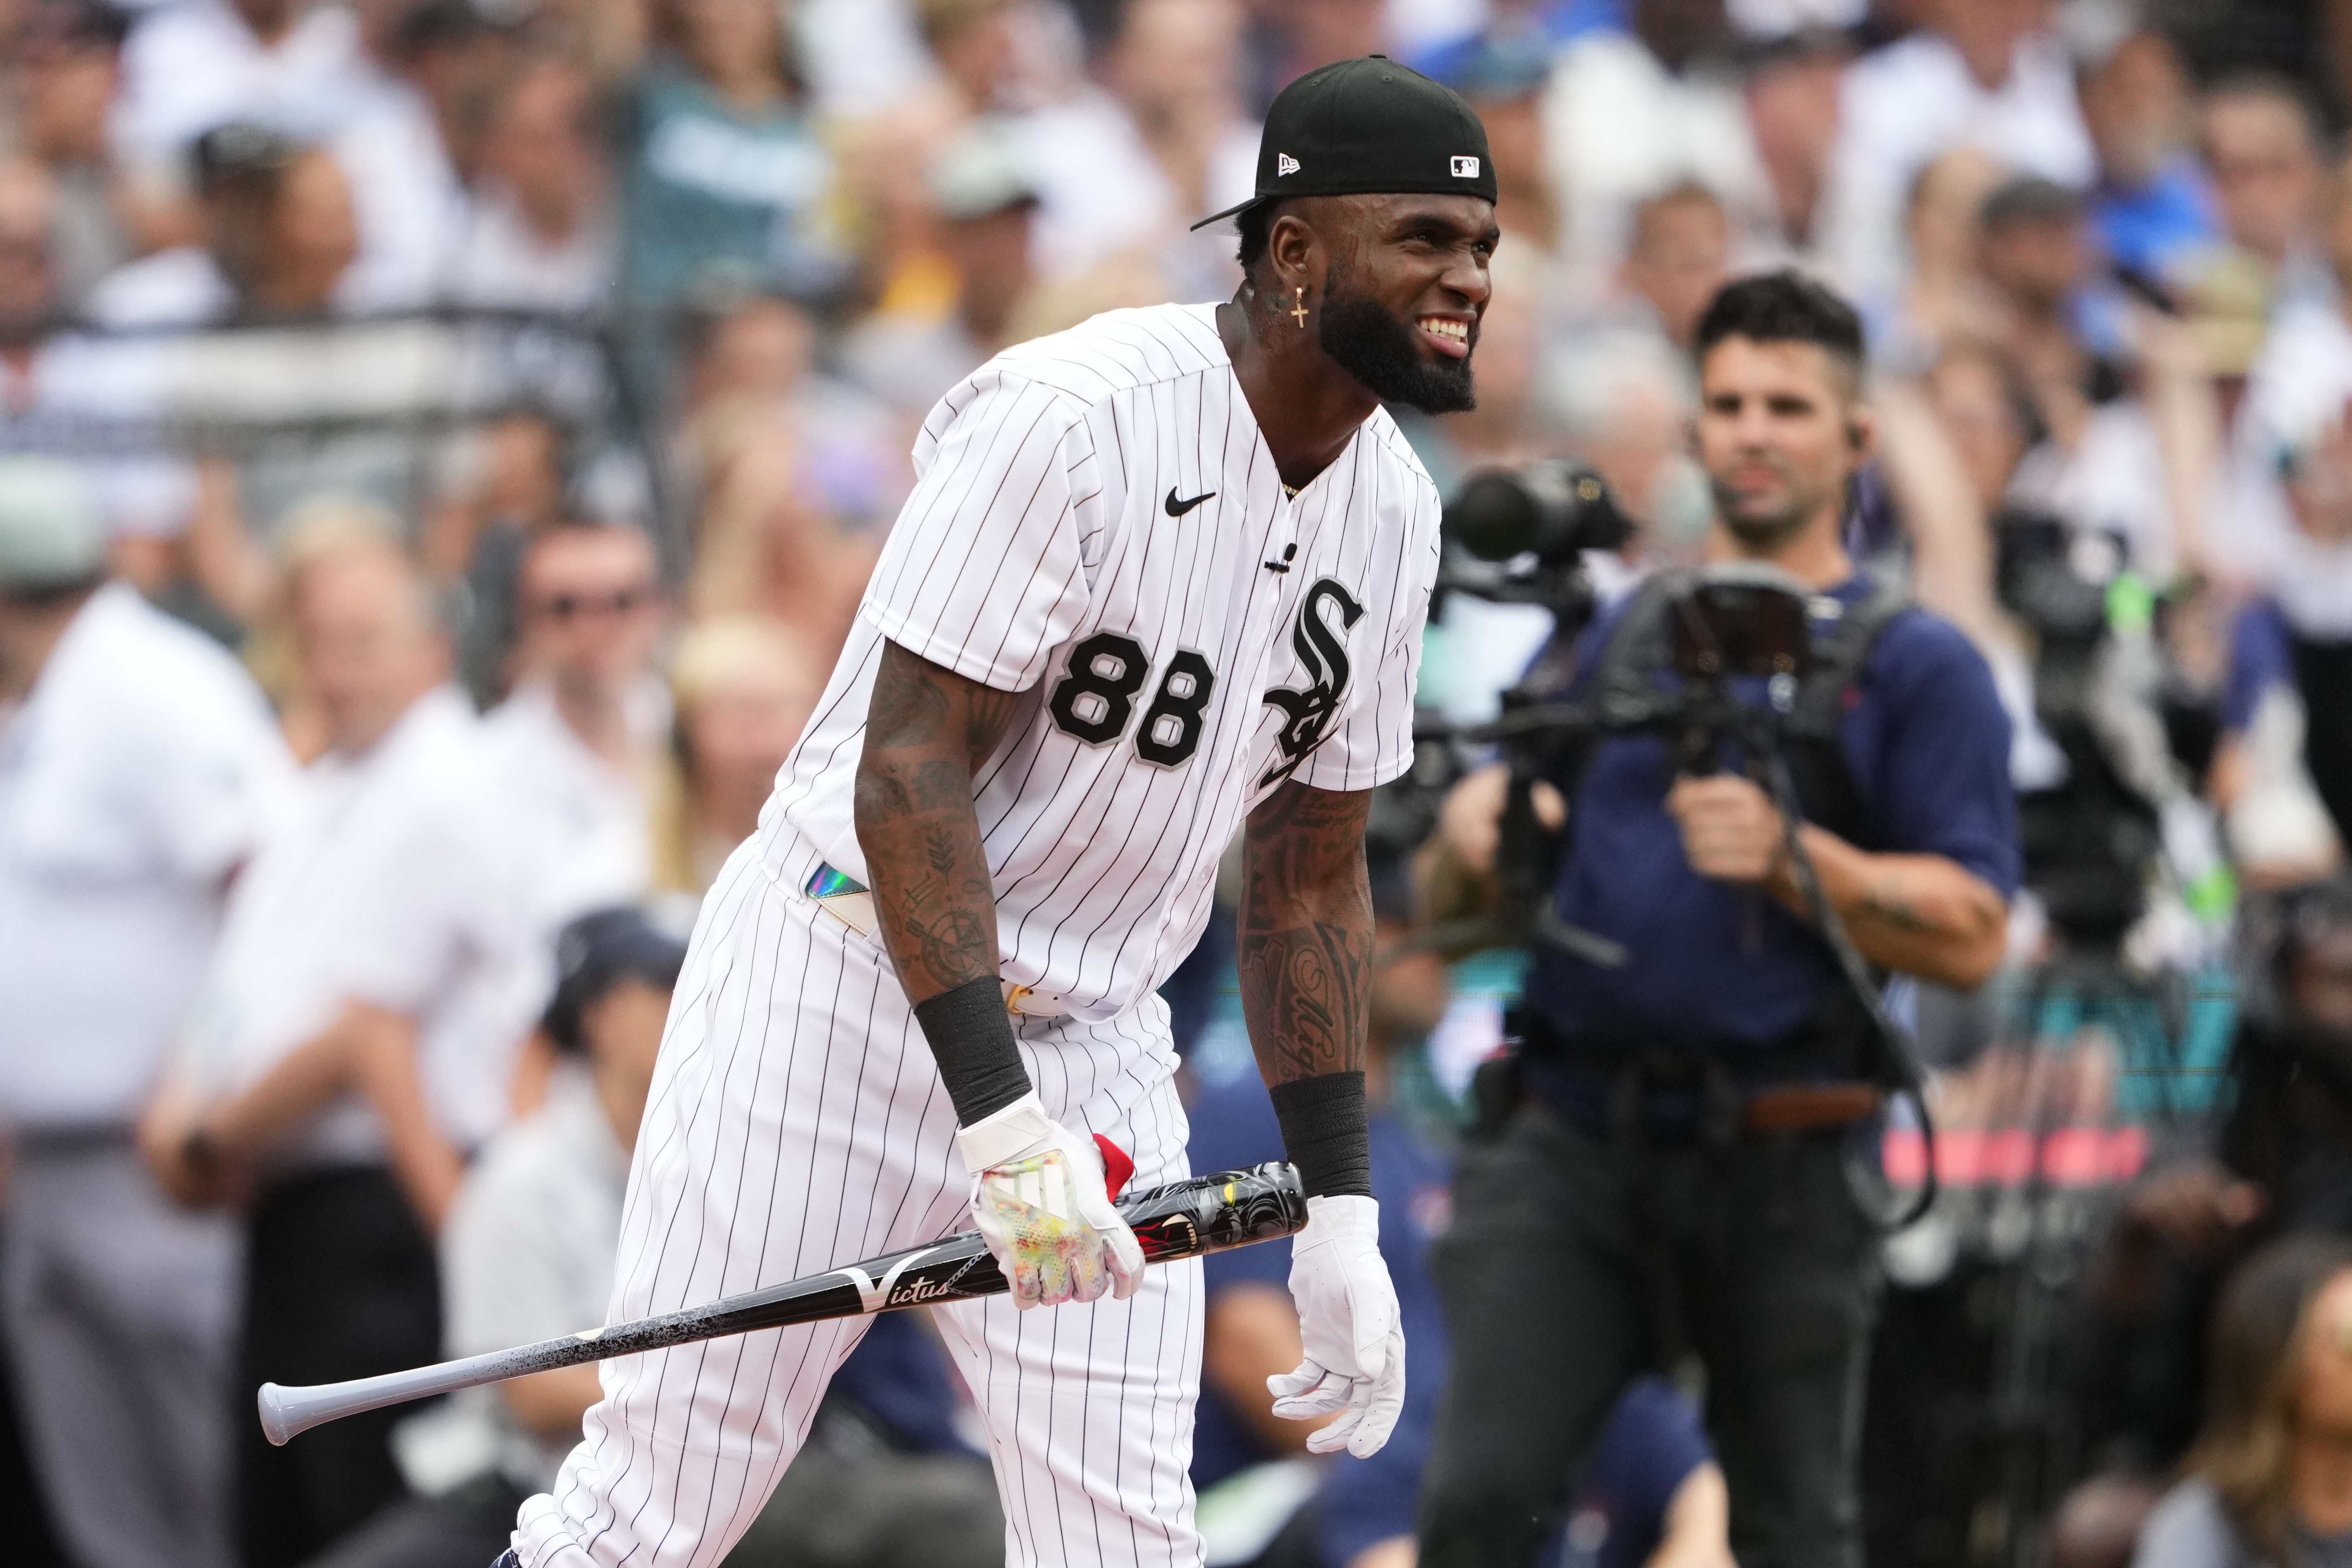 Chicago White Sox: Luis Robert looks to build off 1st half